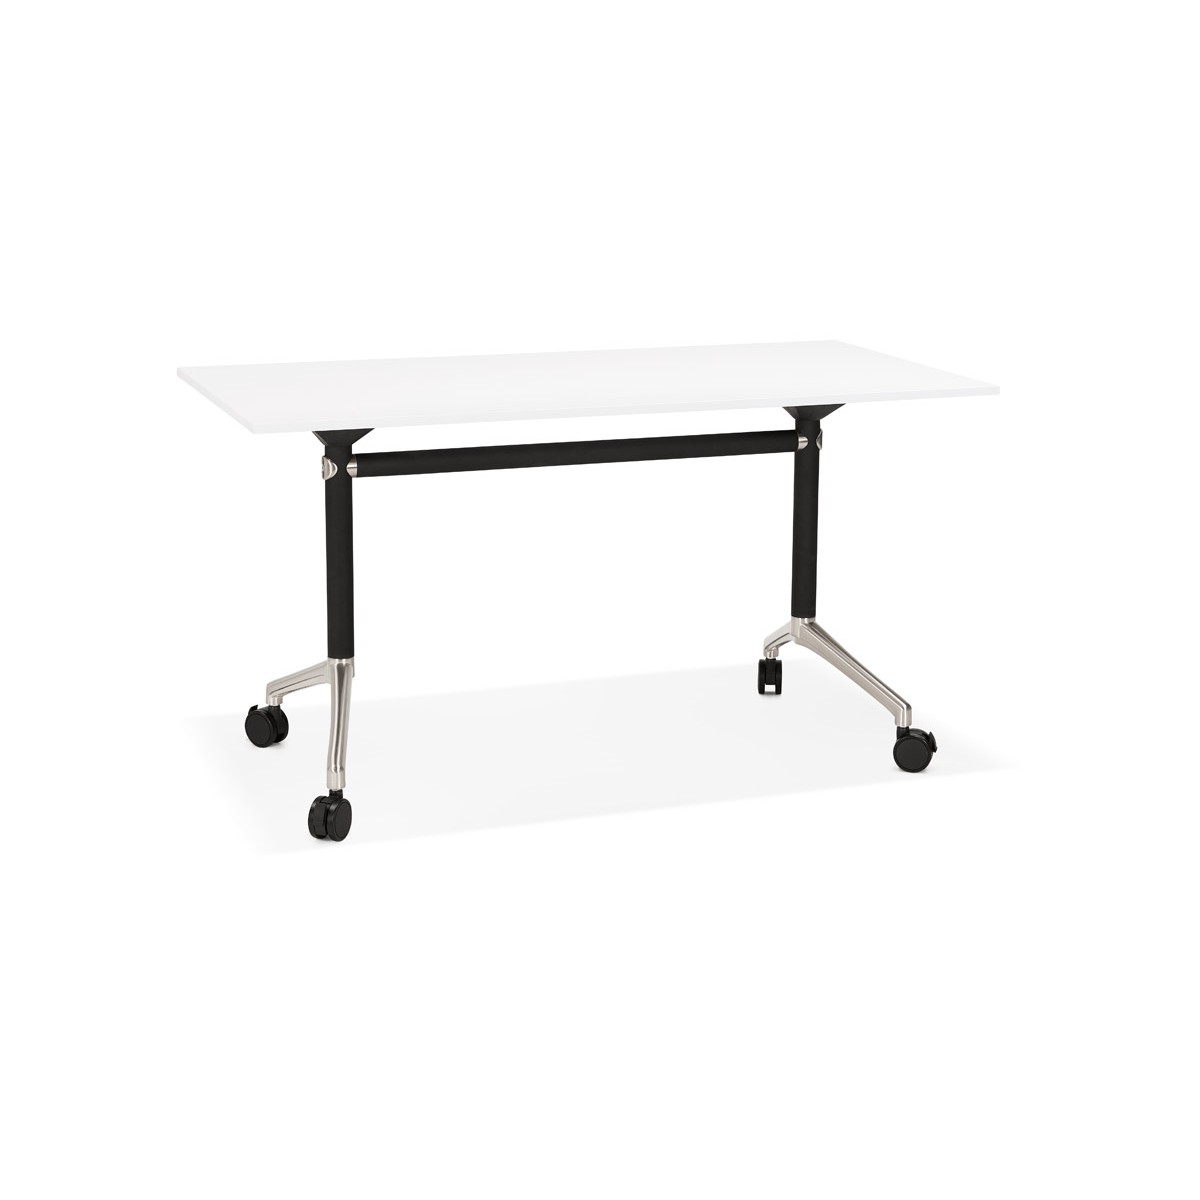 Folding table on white wooden wheels and black metal